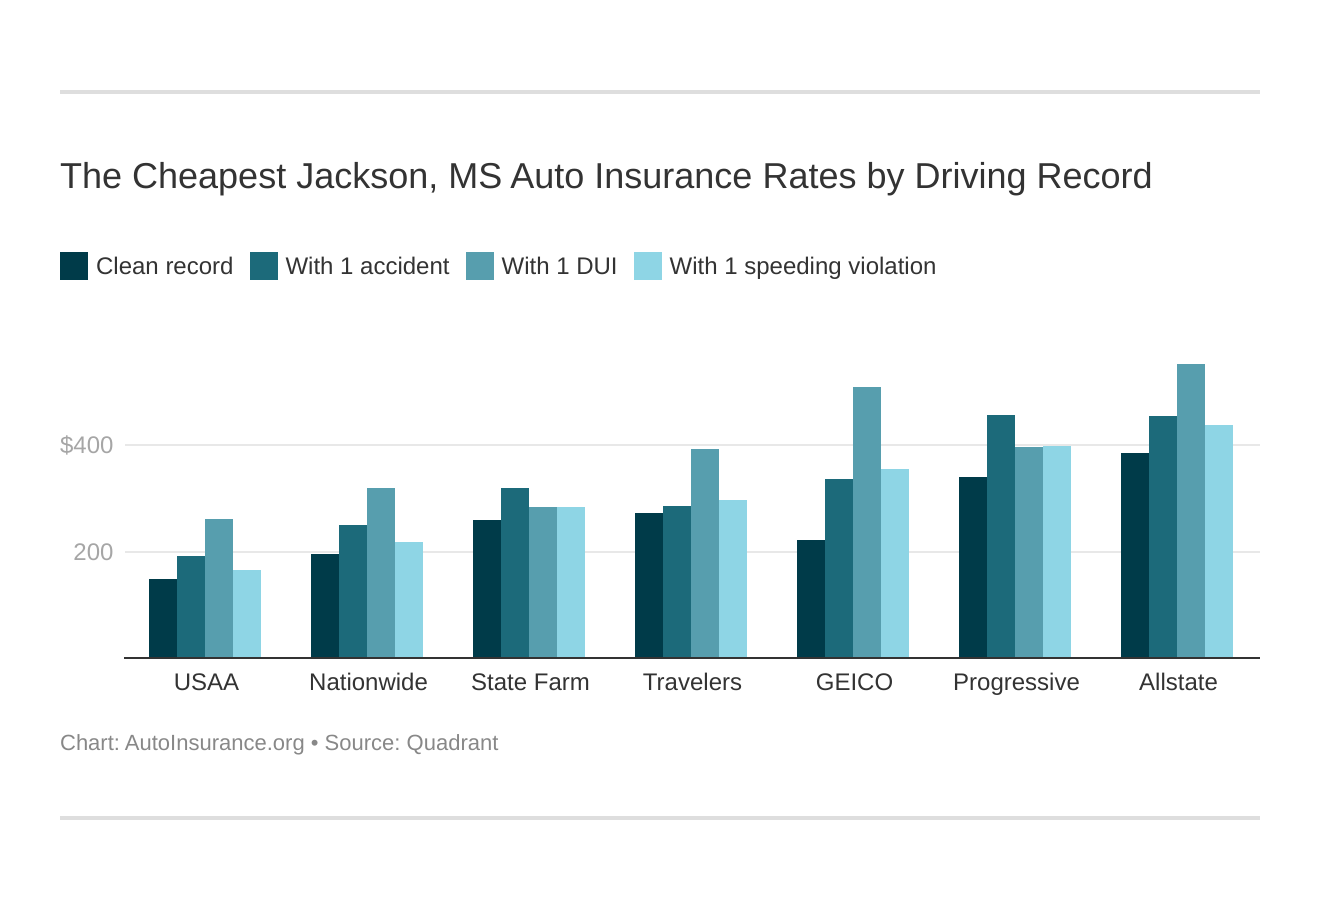 The Cheapest Jackson, MS Auto Insurance Rates by Driving Record